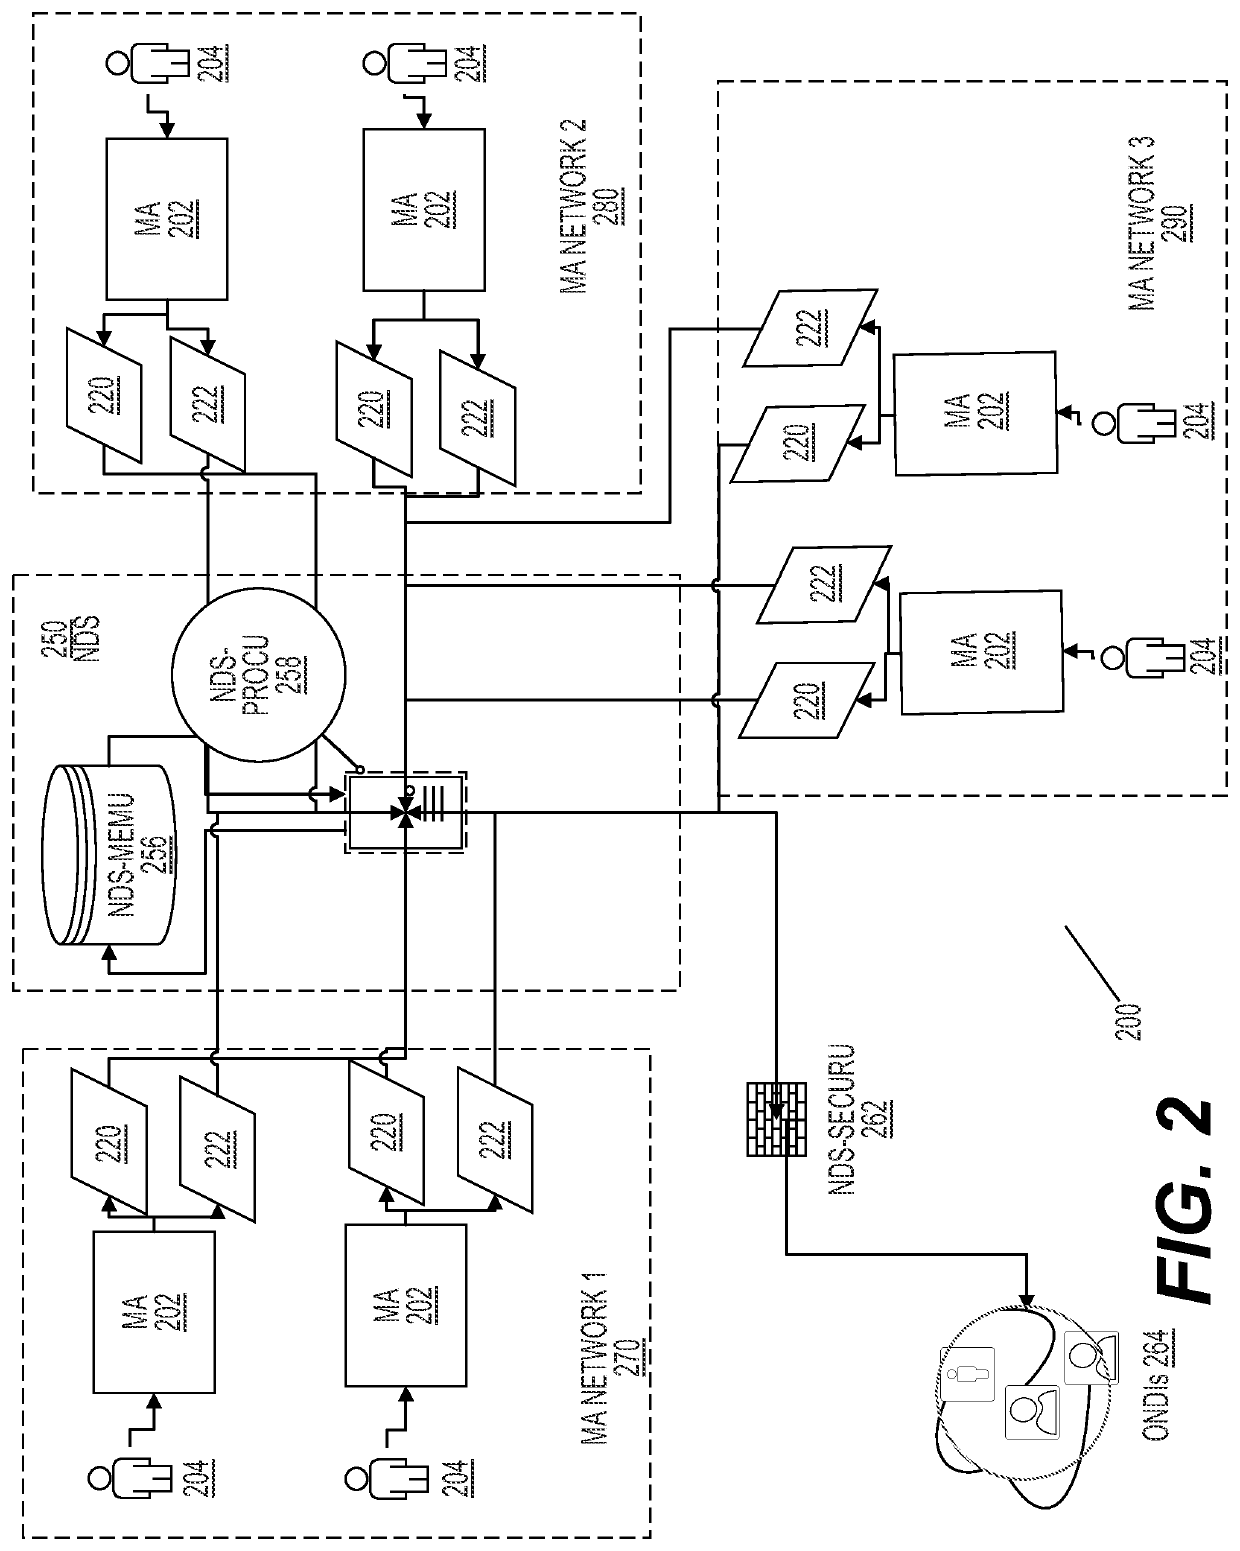 Network-based medical apparatus control and data management systems